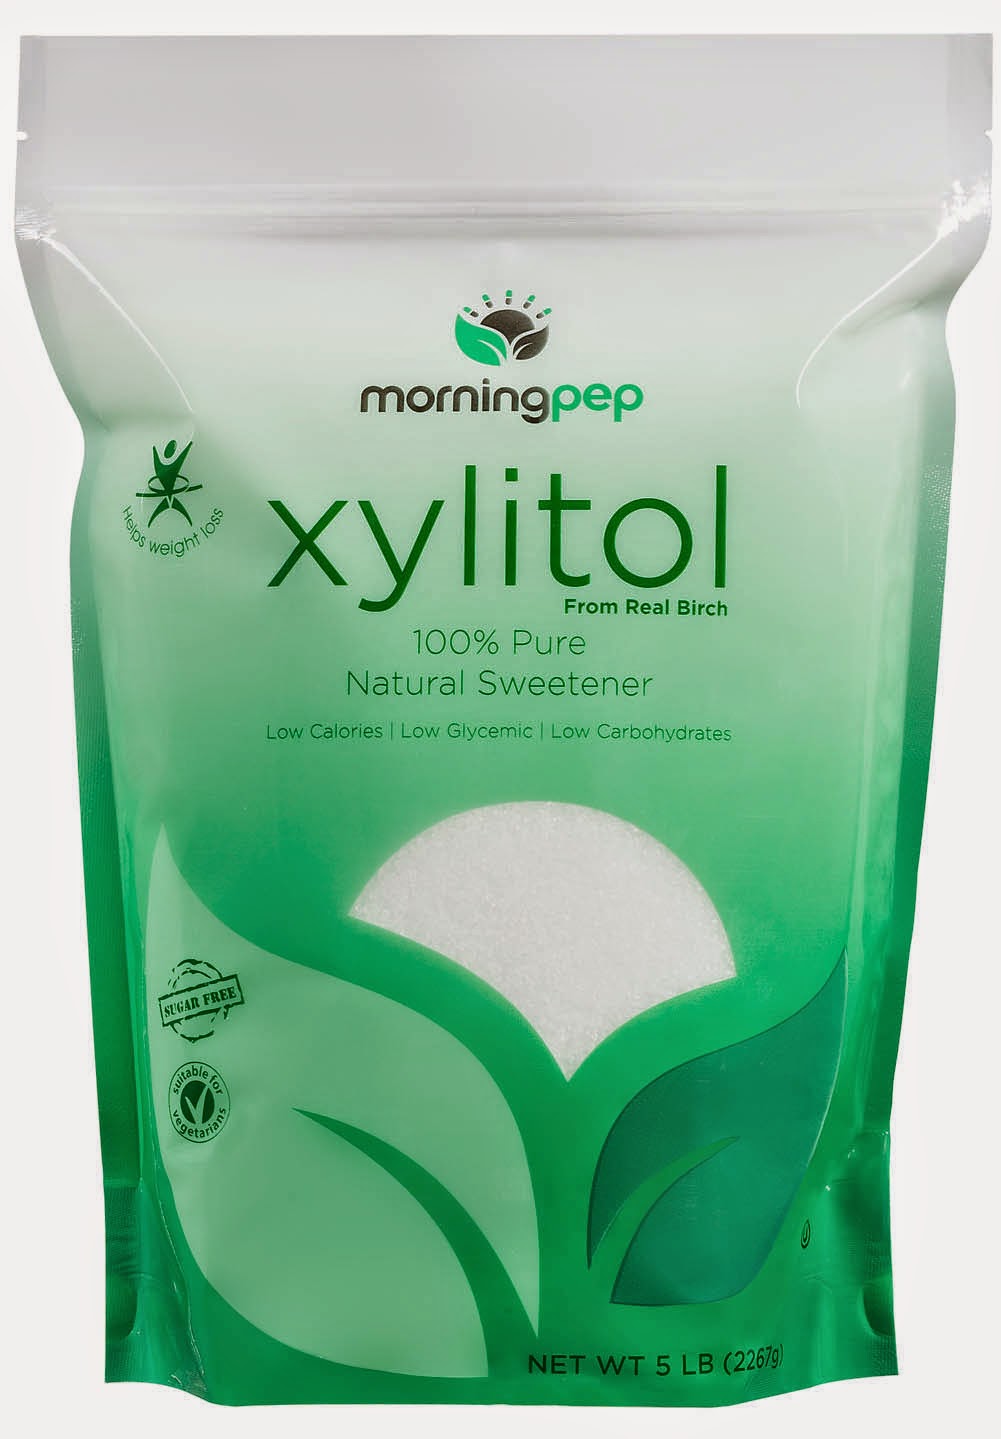 Morning Pep Xylitol Sweetner - First Time Mom and Losing It